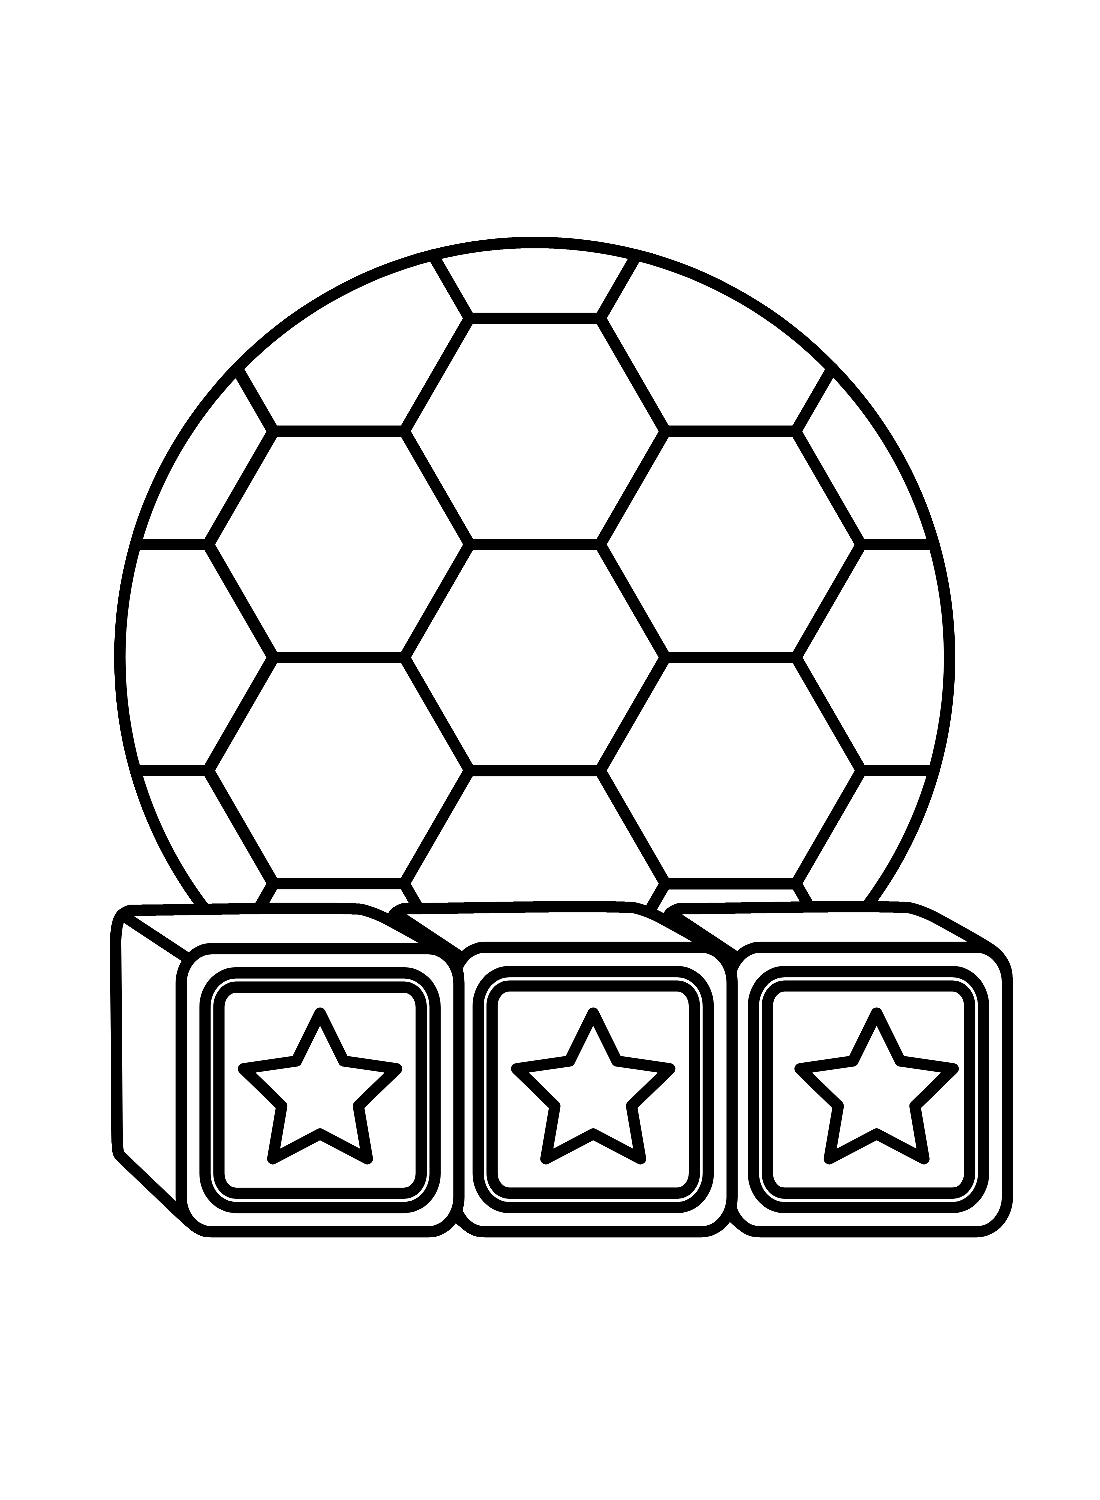 Cubes Blocks with Star and Ball from Toys